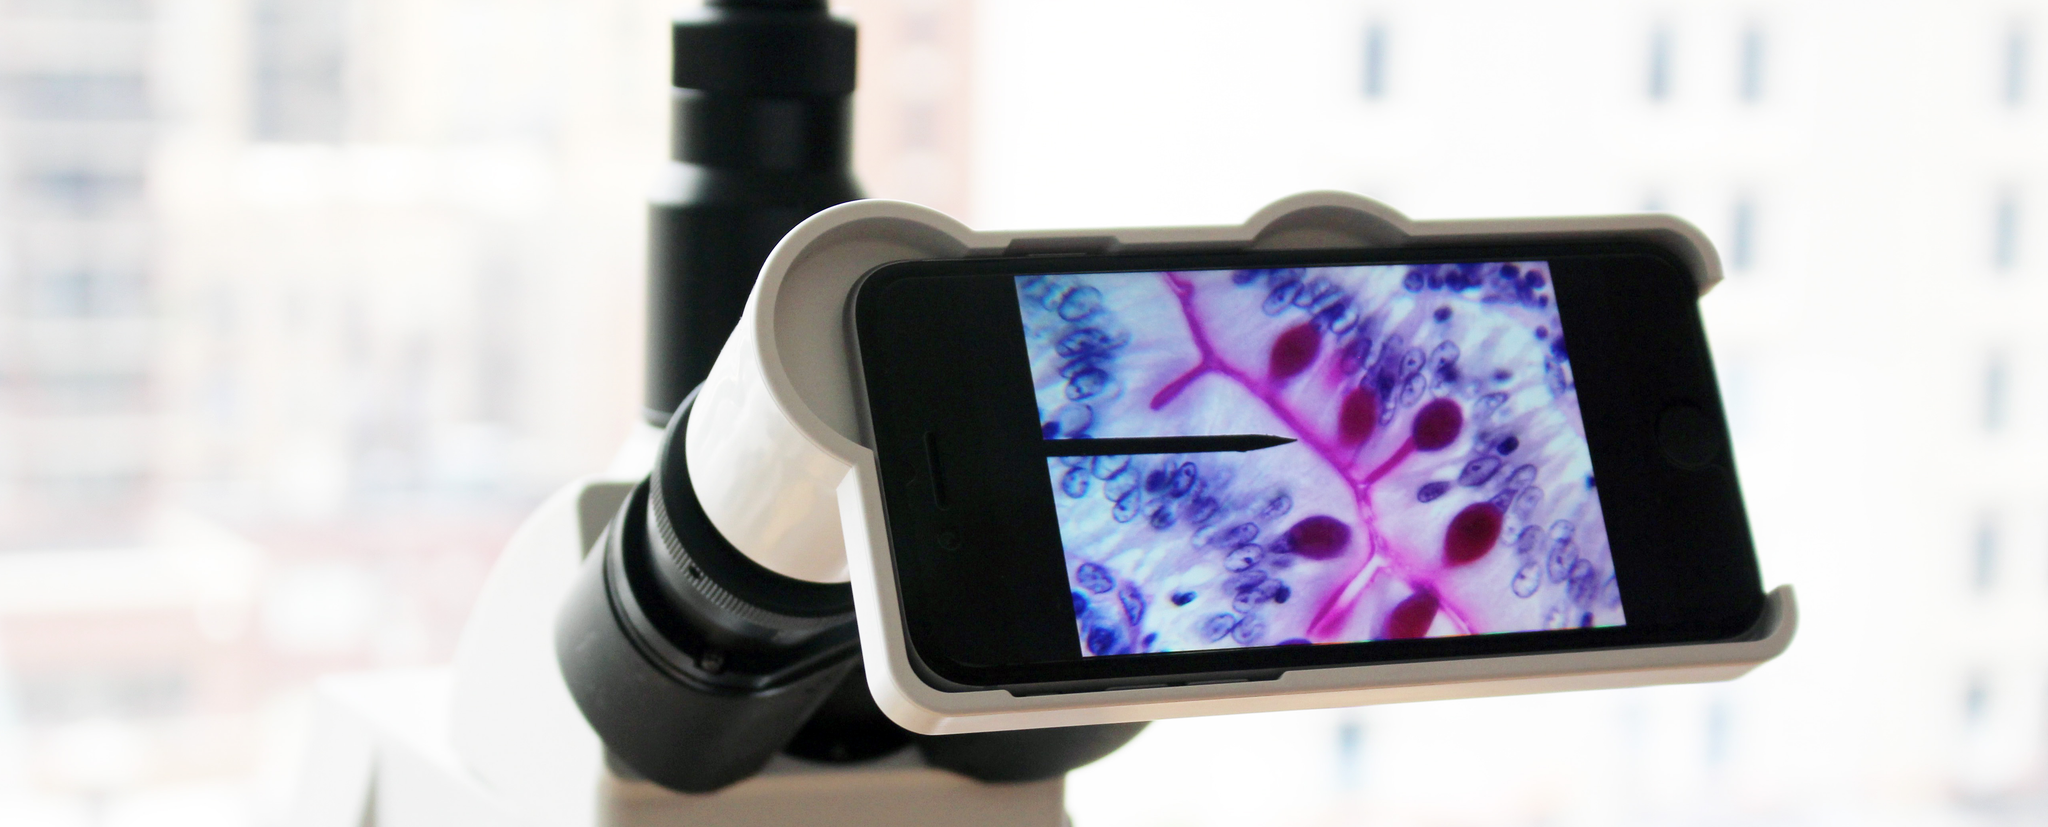 Microscope Adapter For Iphone Camera Take High Quality Photographs